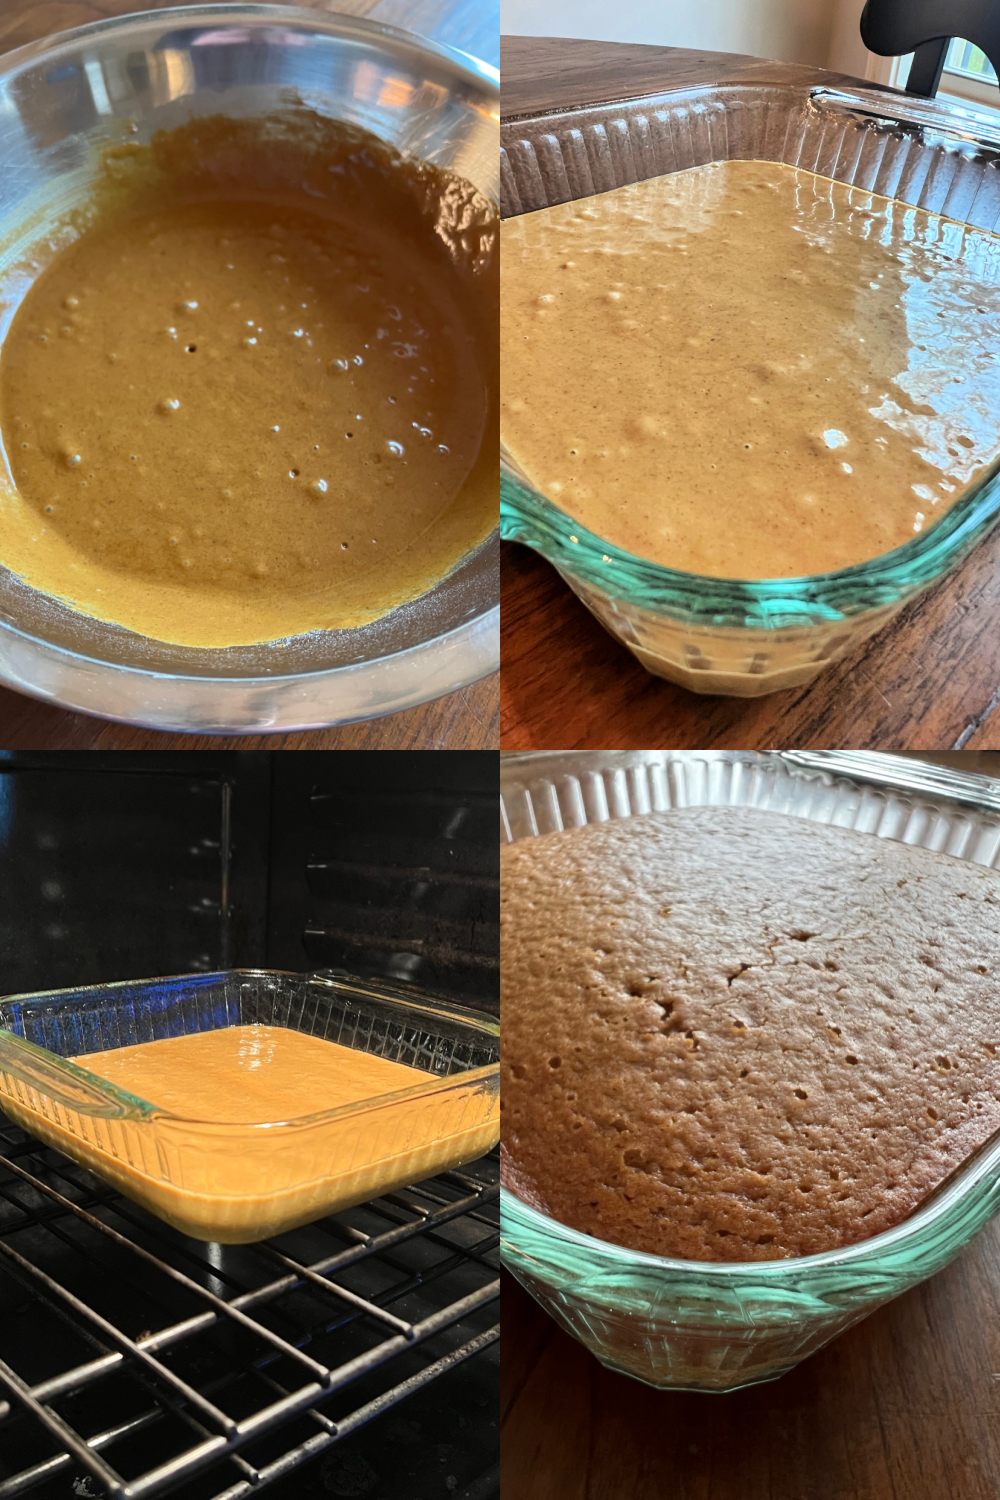 This is a 4 photo collage showing the cake being made. One photo shows the finished batter in a silver bowl. The second photo shows the batter in a clear glass 8x8 baking dish. The third photo shows the pan placed in the oven ready to bake. The last photo shows the cake after baking.  